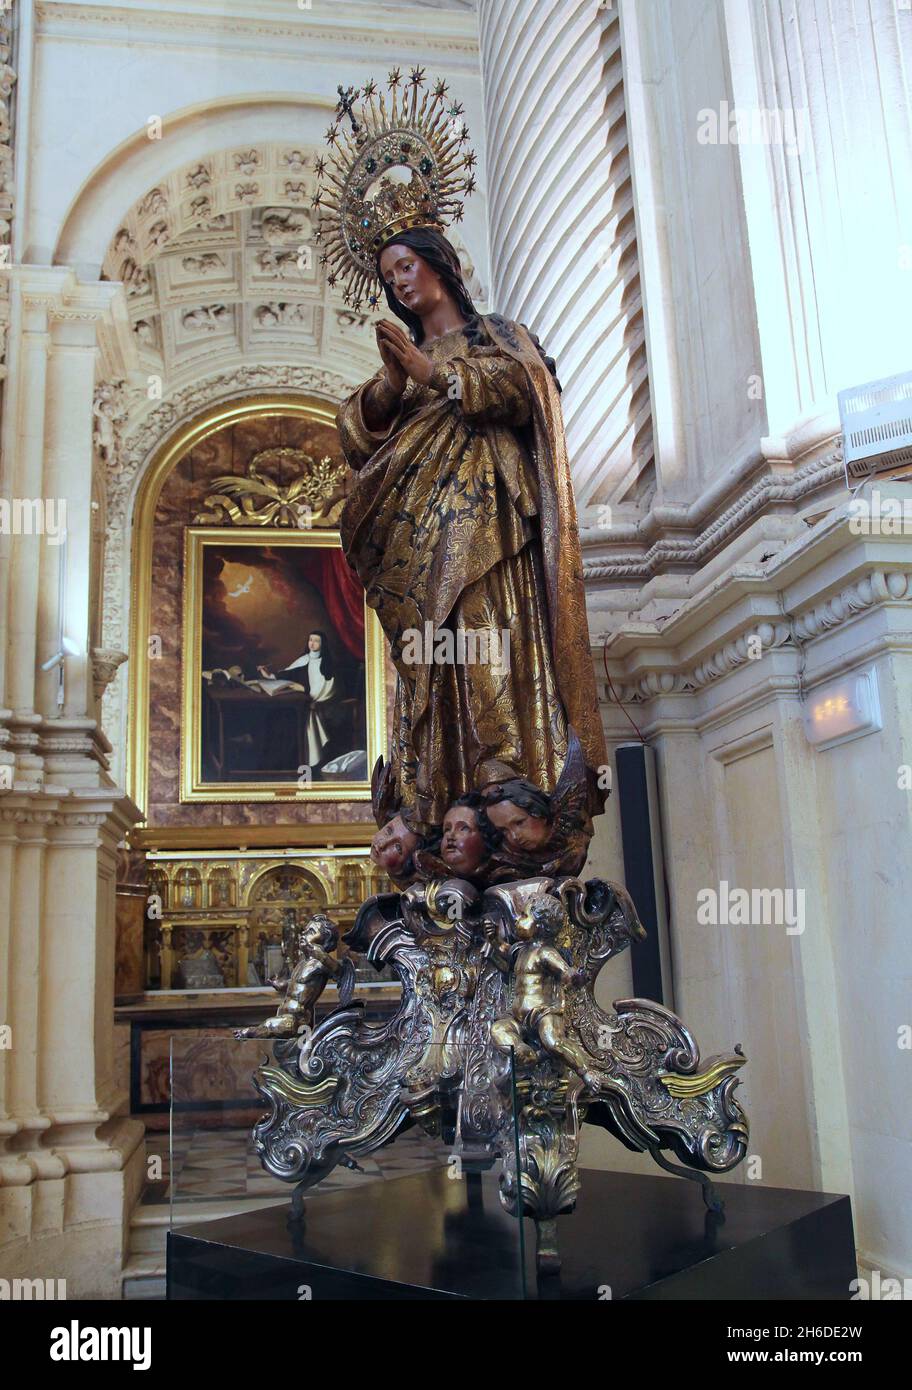 Immaculate Conception of the main sacristy of the Cathedral of Seville   (1658) by the sculptor Alonso Martinez.(1612 - 1668 ) Alonso was a Baroque sculptor who worked mainly in the cities of Cádiz and Seville. Stock Photo